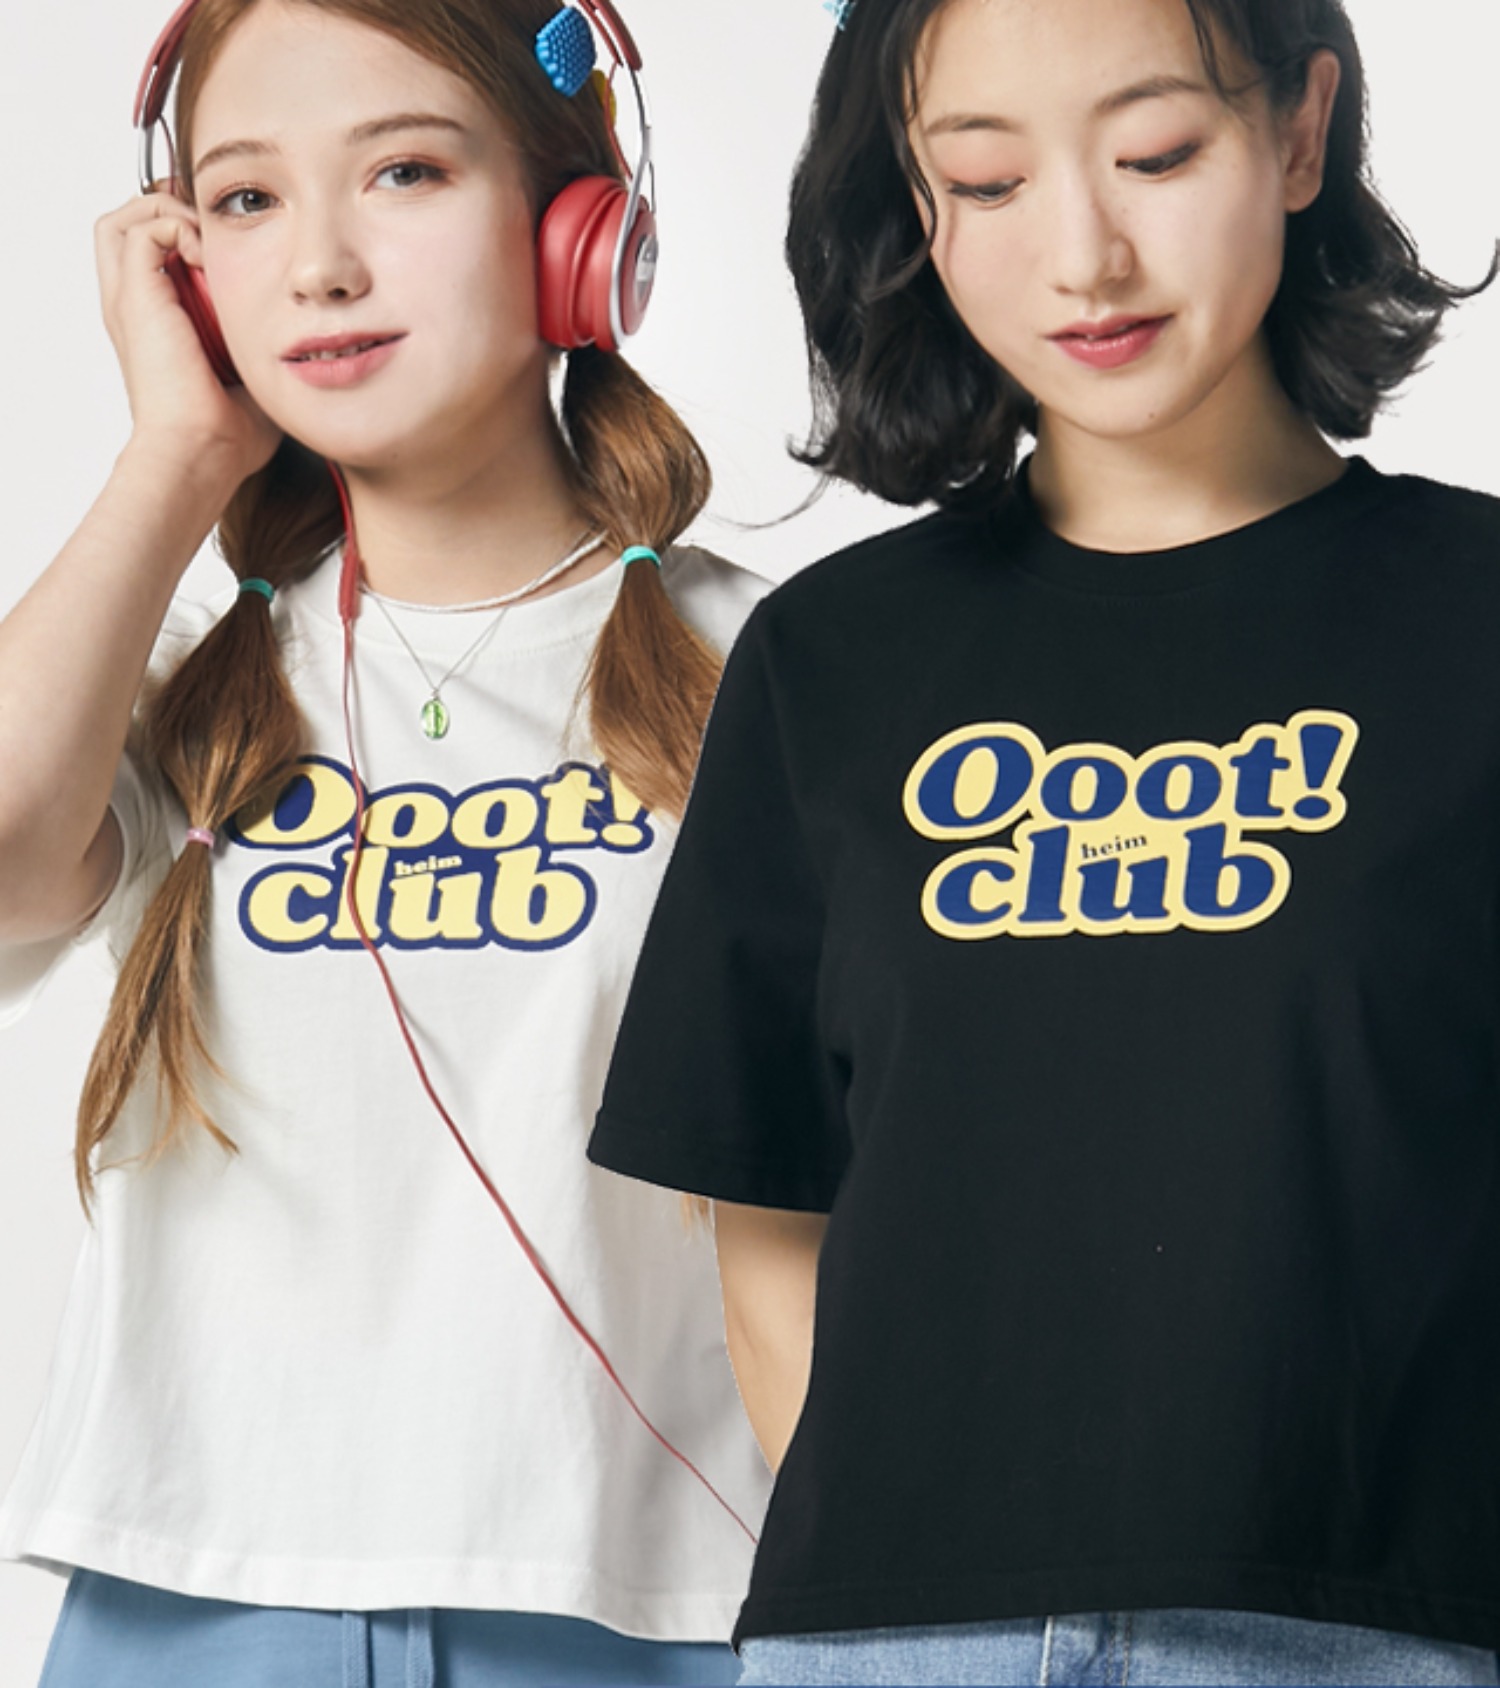 [SET] MIDDLE OOOTCLUB LOGO CROP T-SHIRT - by HEIM